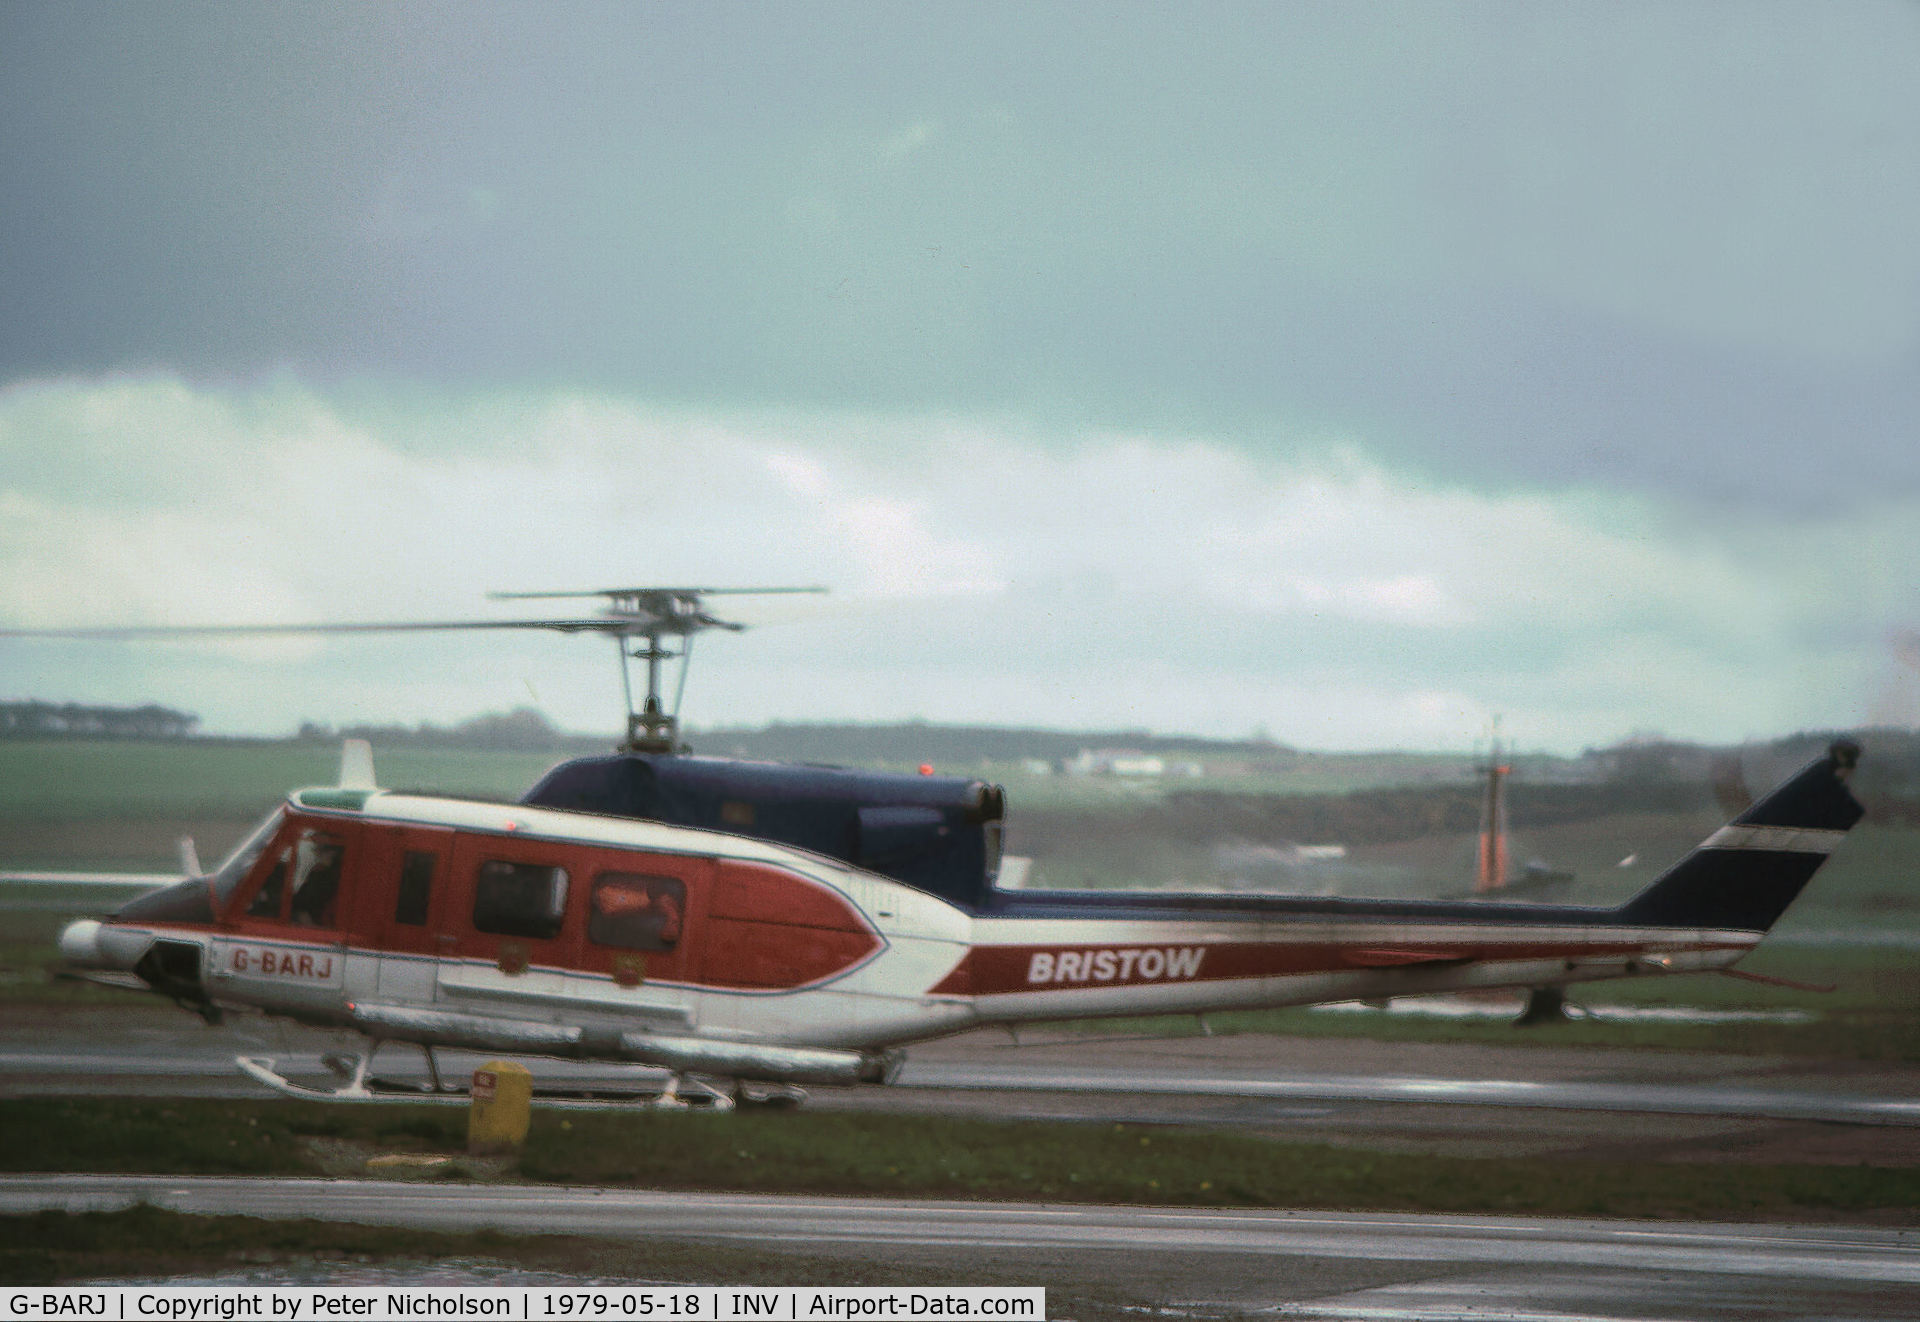 G-BARJ, 1973 Bell 212 C/N 30563, Bell 212 of Bristows Helicopters seen at Inverness Airport at Dalcross in May 1979.